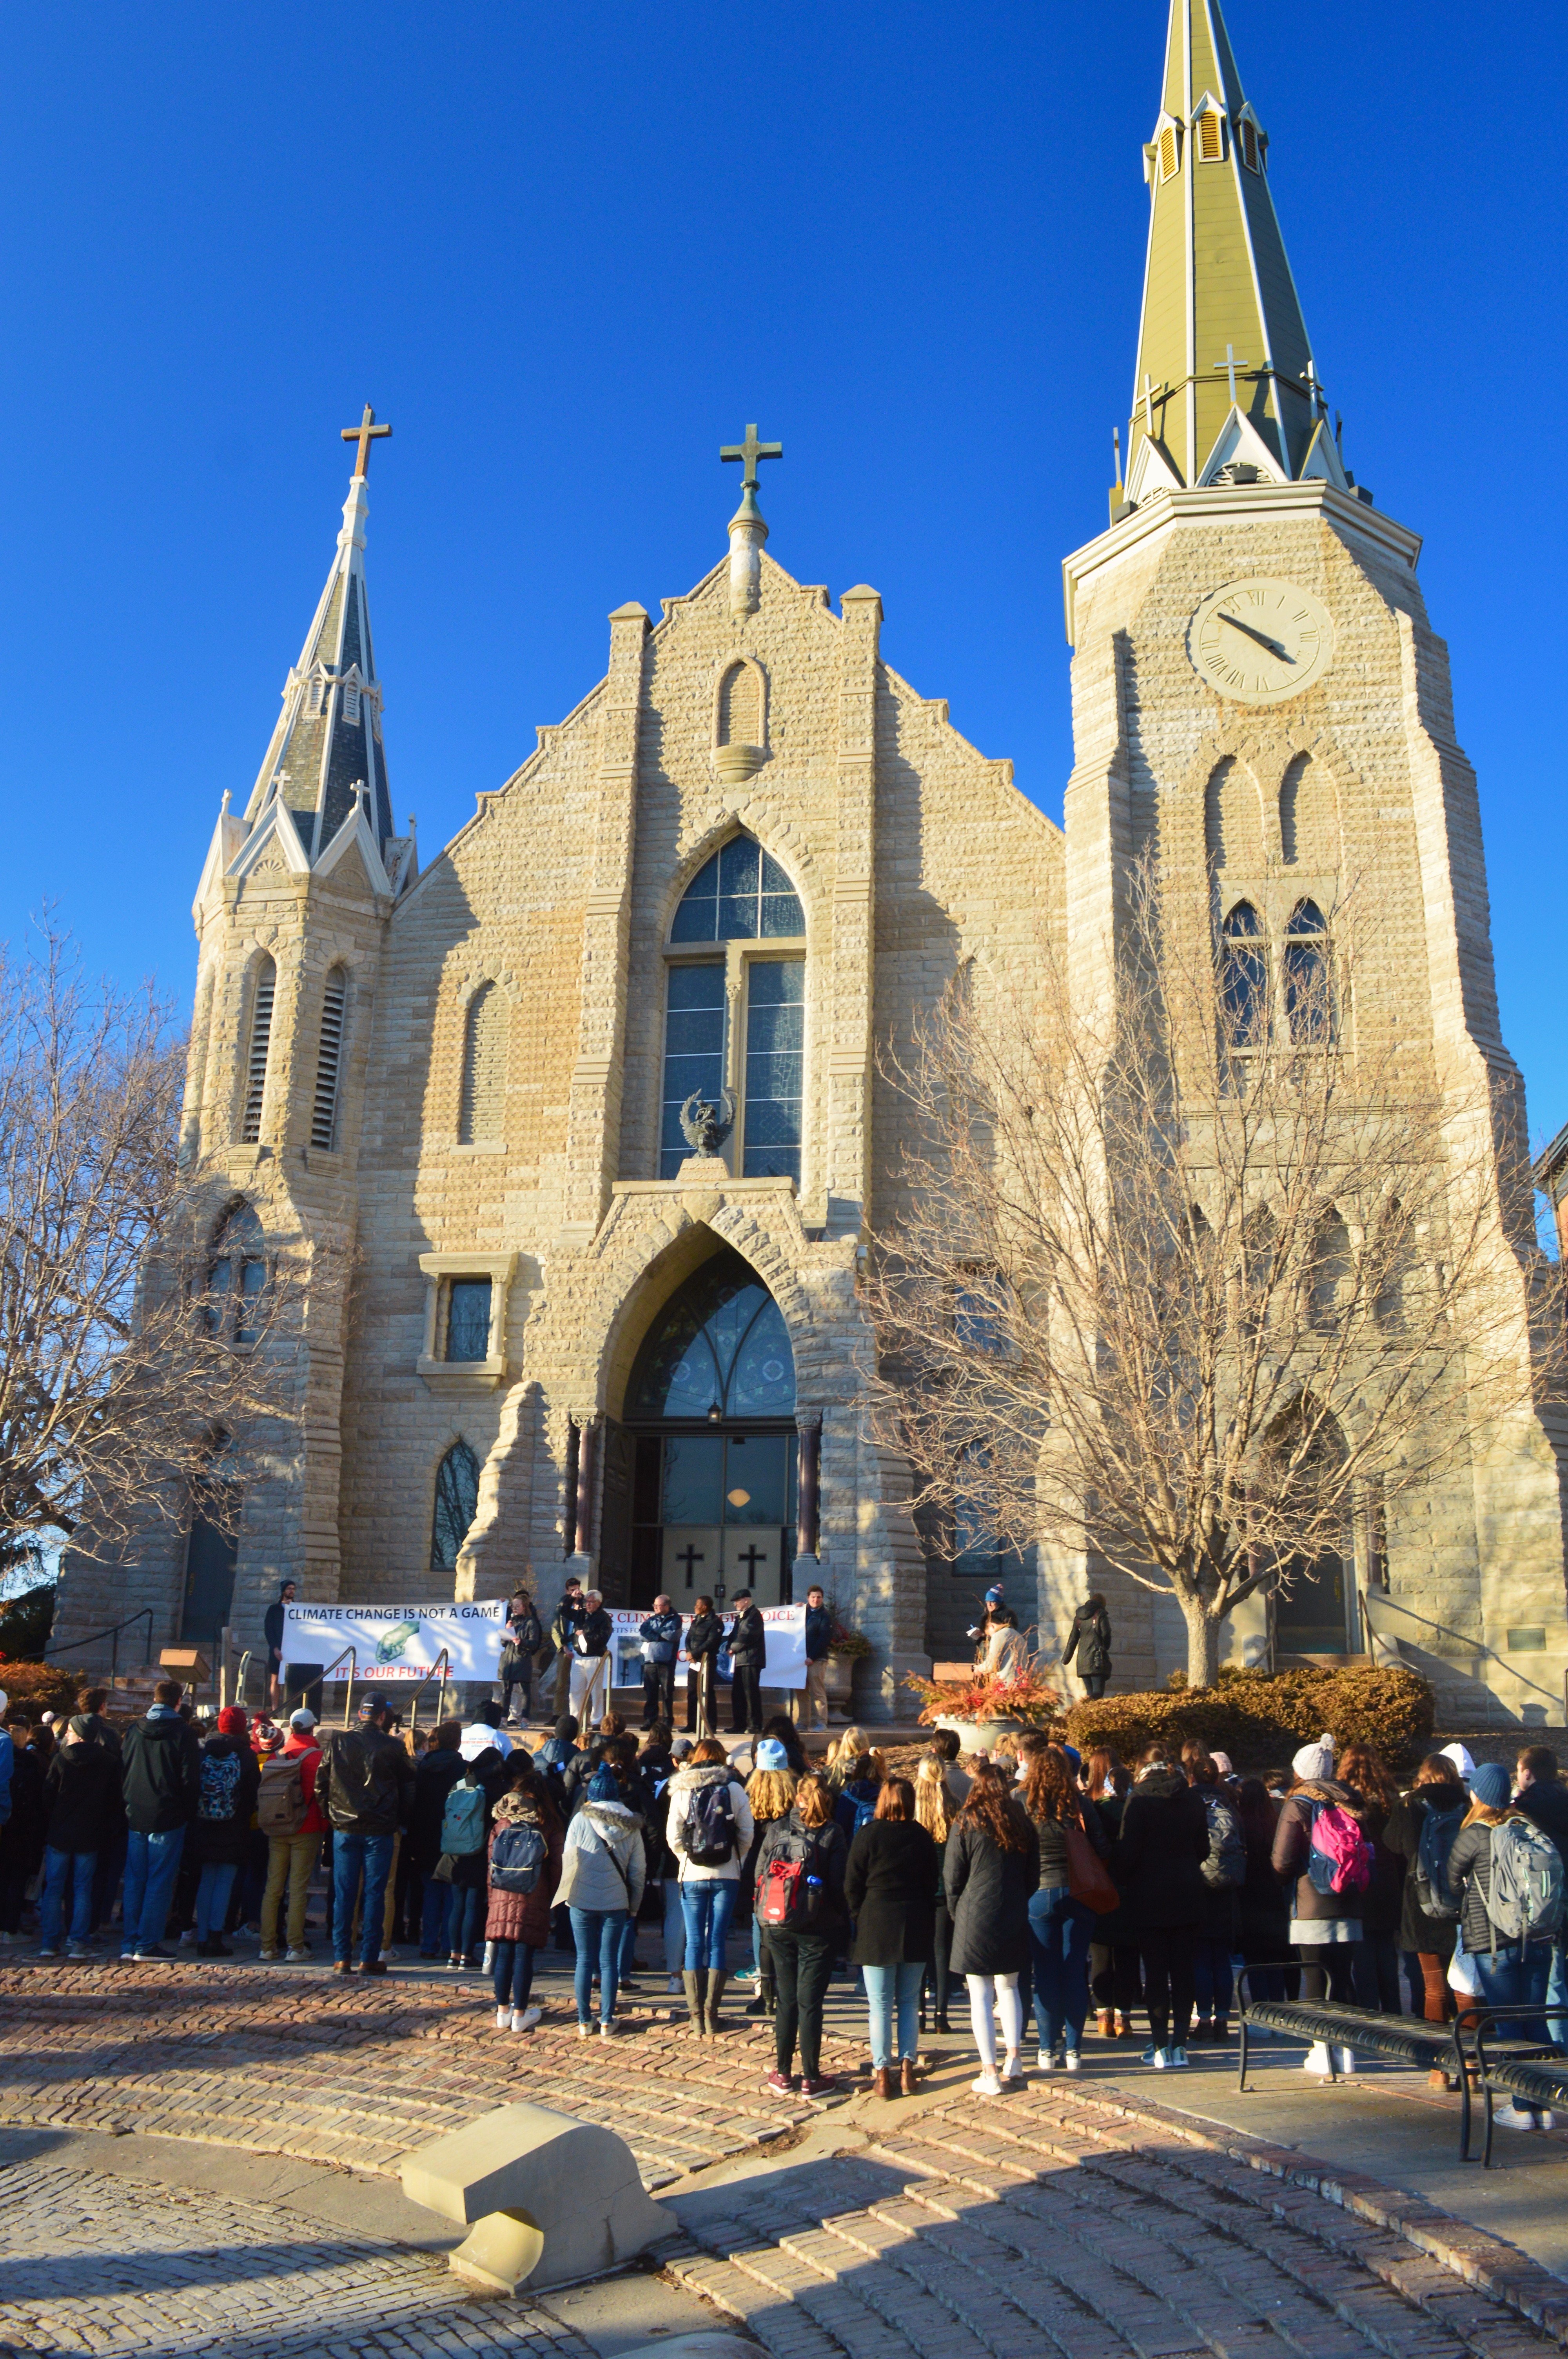 Students and others gather on the steps of St. John Church on the Creighton University campus in Omaha, Neb., Feb. 20, 2020, for a prayerful rally to call on school leaders to divest from fossil fuels. (CNS photo/courtesy Emily Burke)